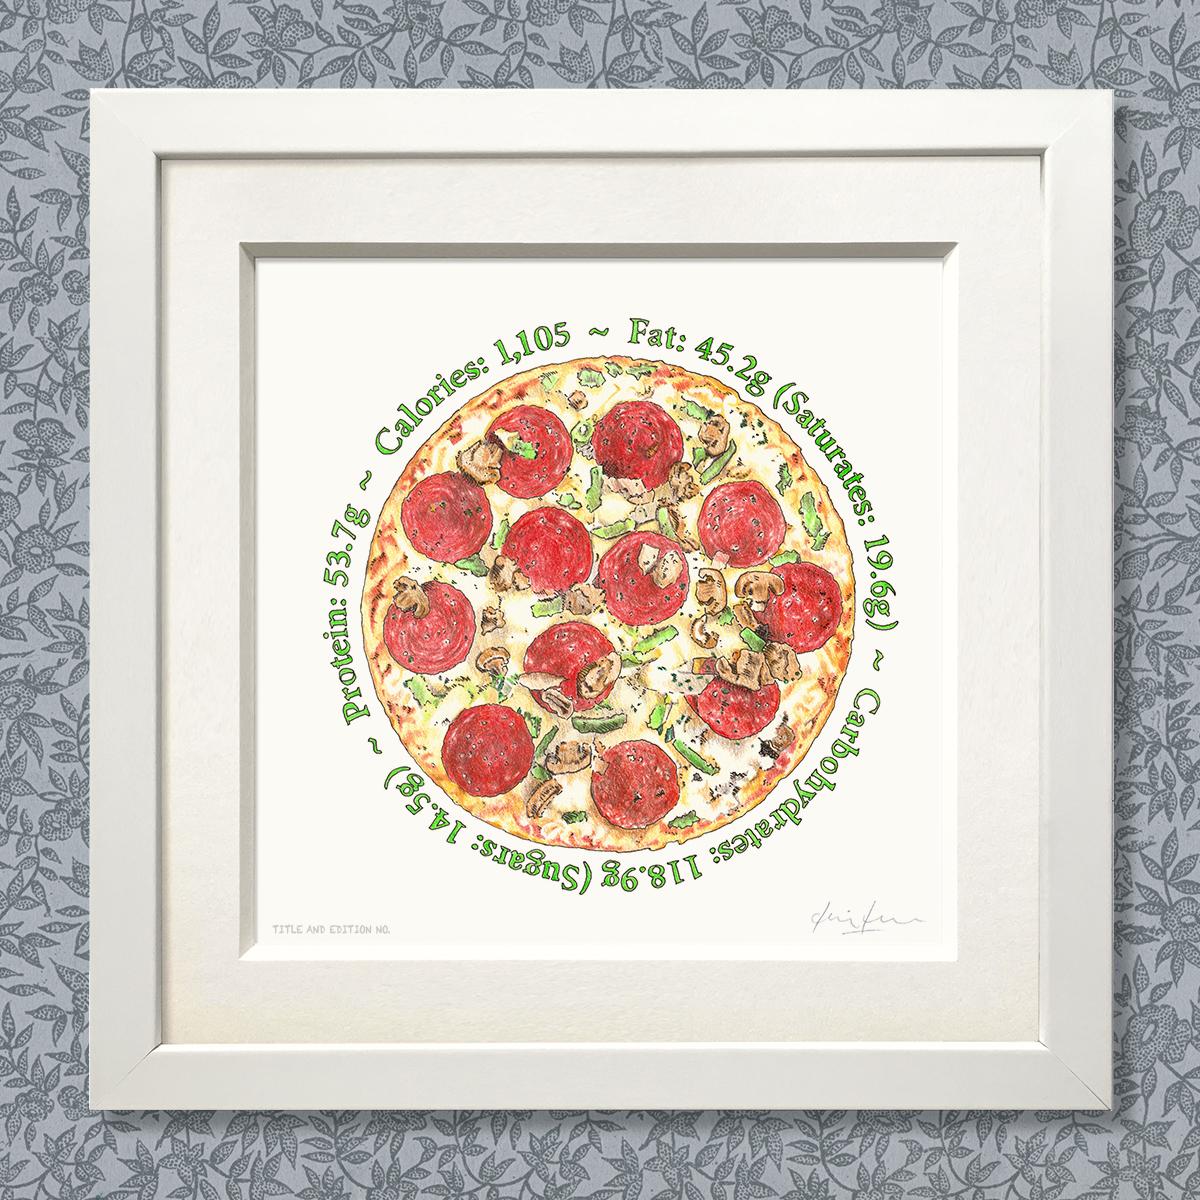 Limited edition print of coloured drawing of pizza, in a white frame.